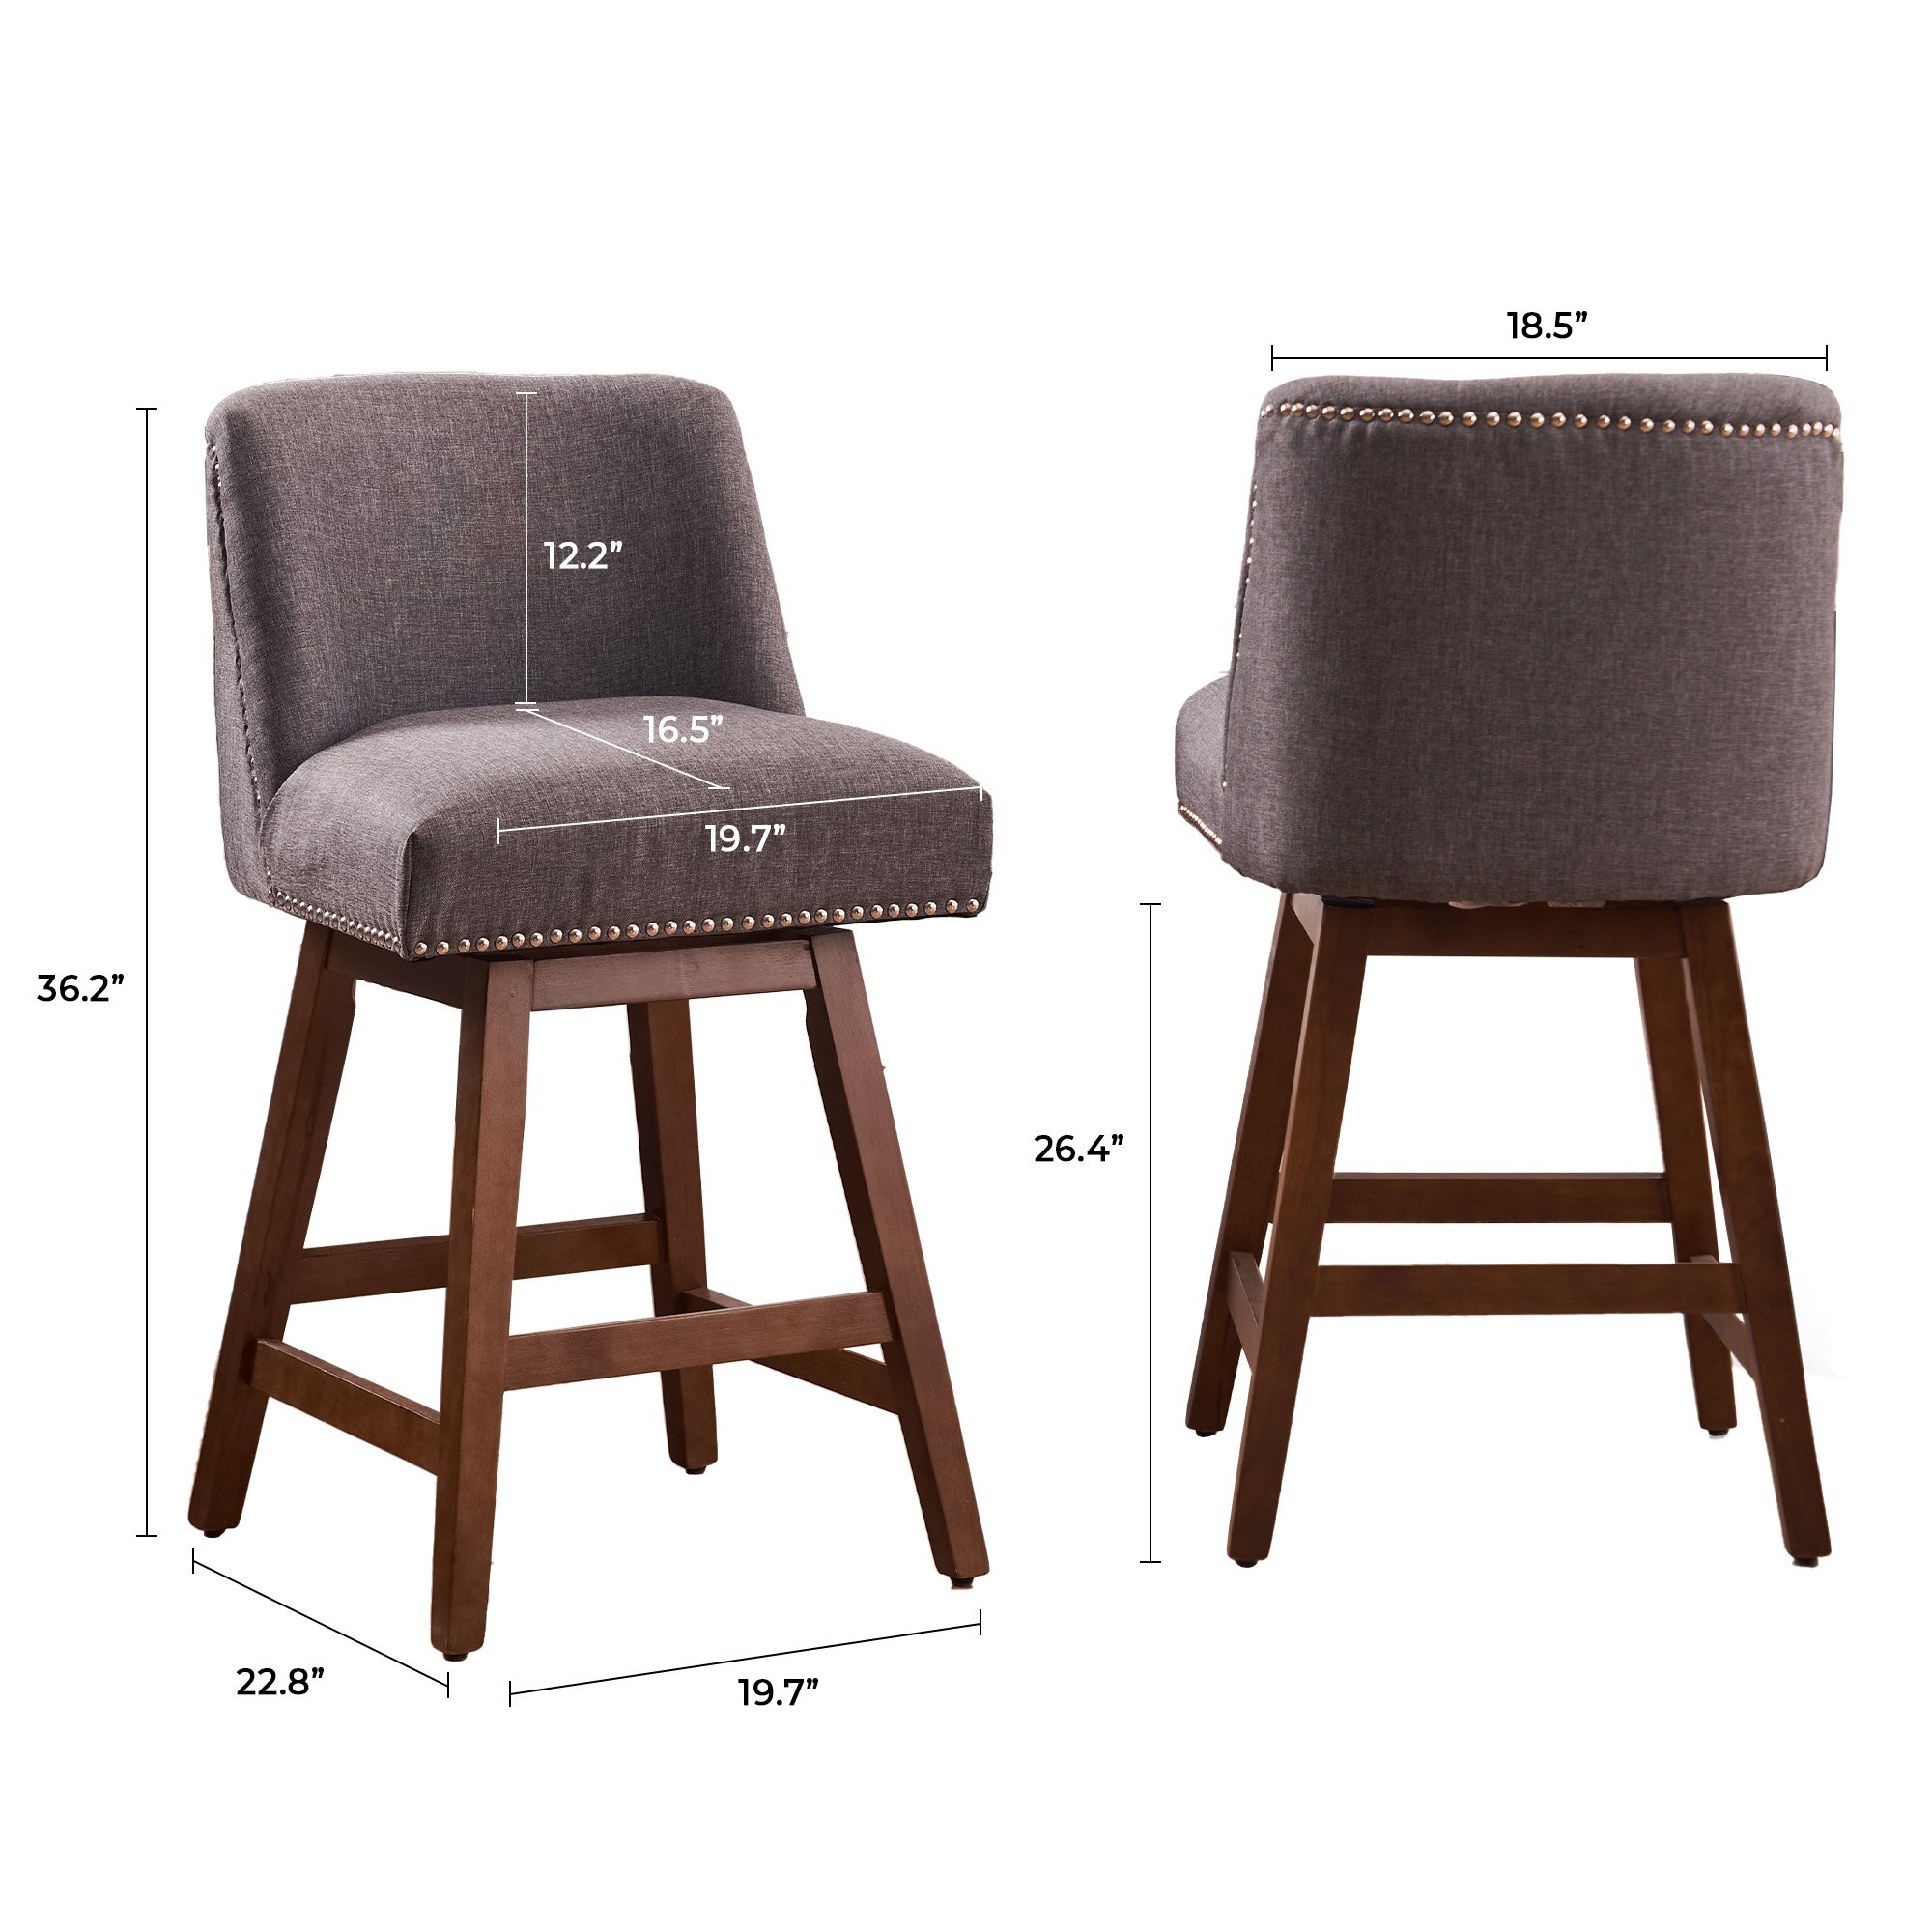 Swivel Counter Height Fabric Upholstered Wooden Chairs Barstools With Nailhead Trim In Gray, Set Of 2, Low Back, Light Gray